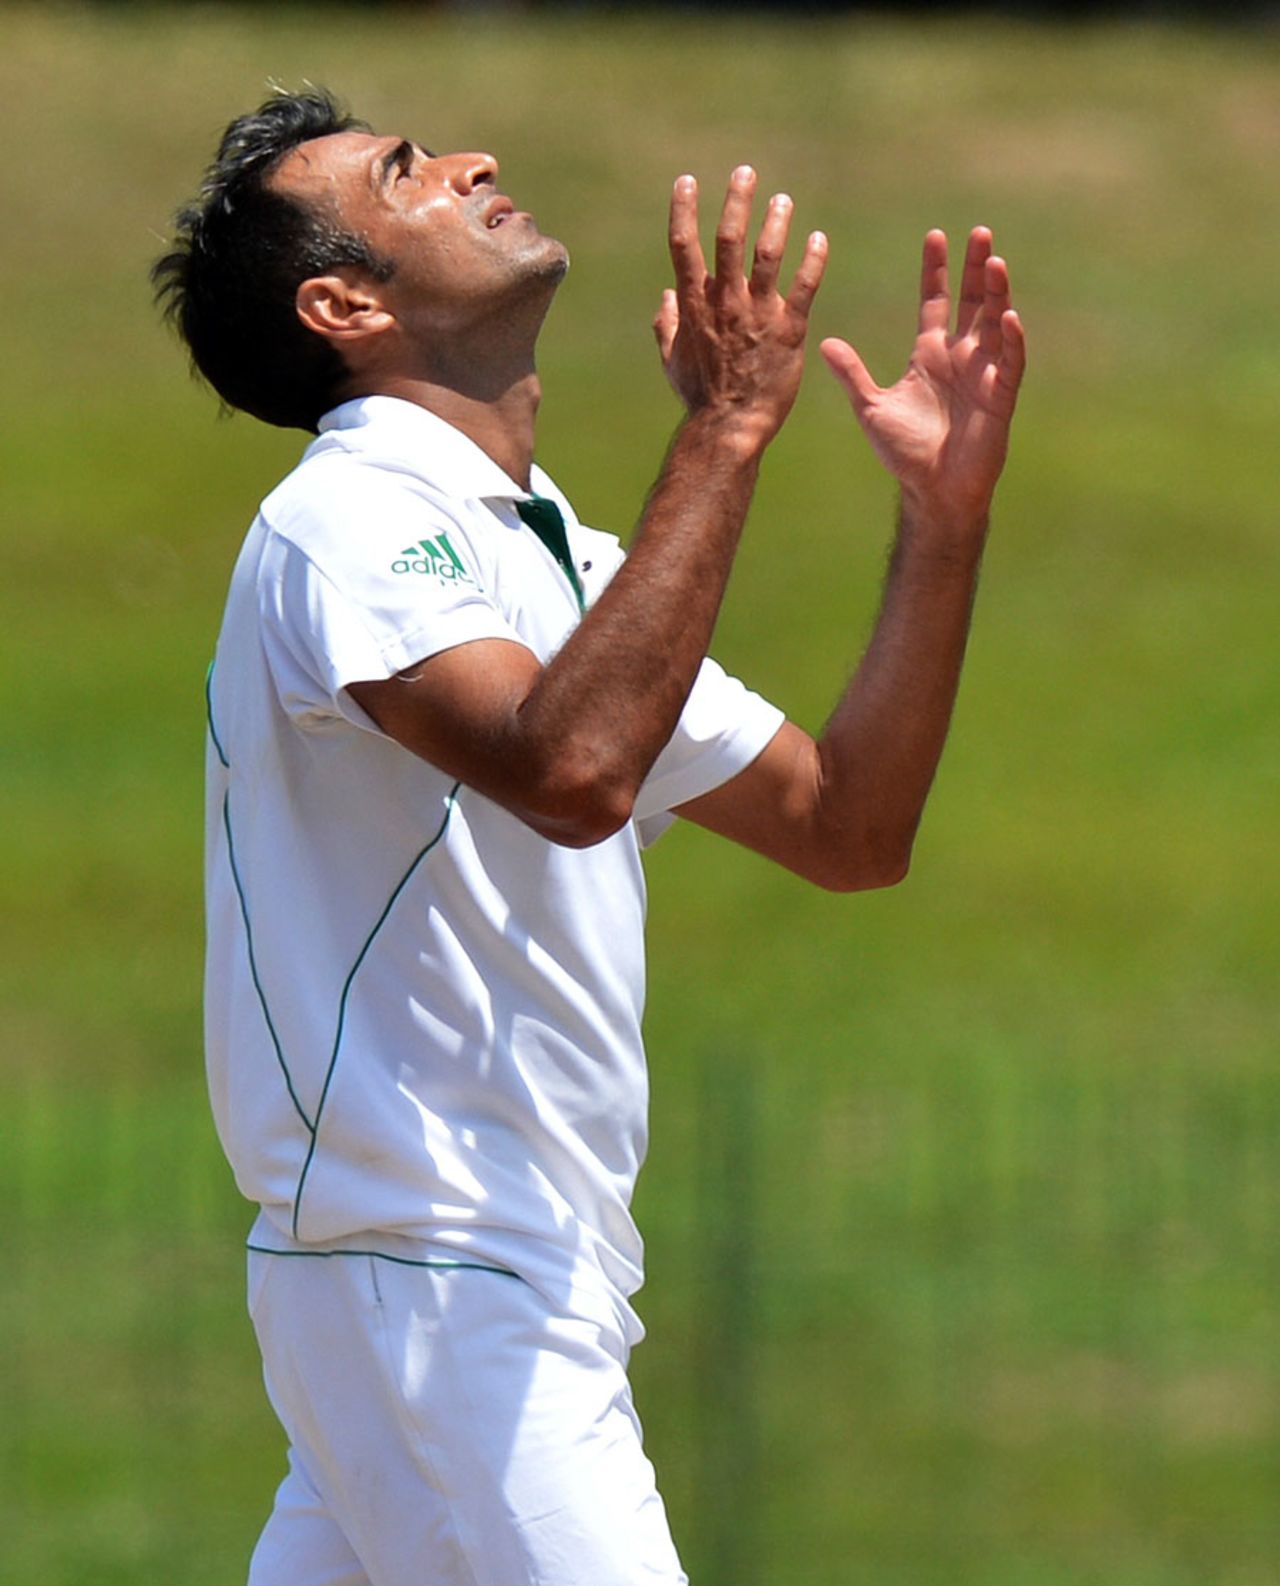 Imran Tahir looks to the skies after finally snaring a wicket, Sri Lanka v South Africa, 2nd Test, Colombo, 2nd day, July 25, 2014